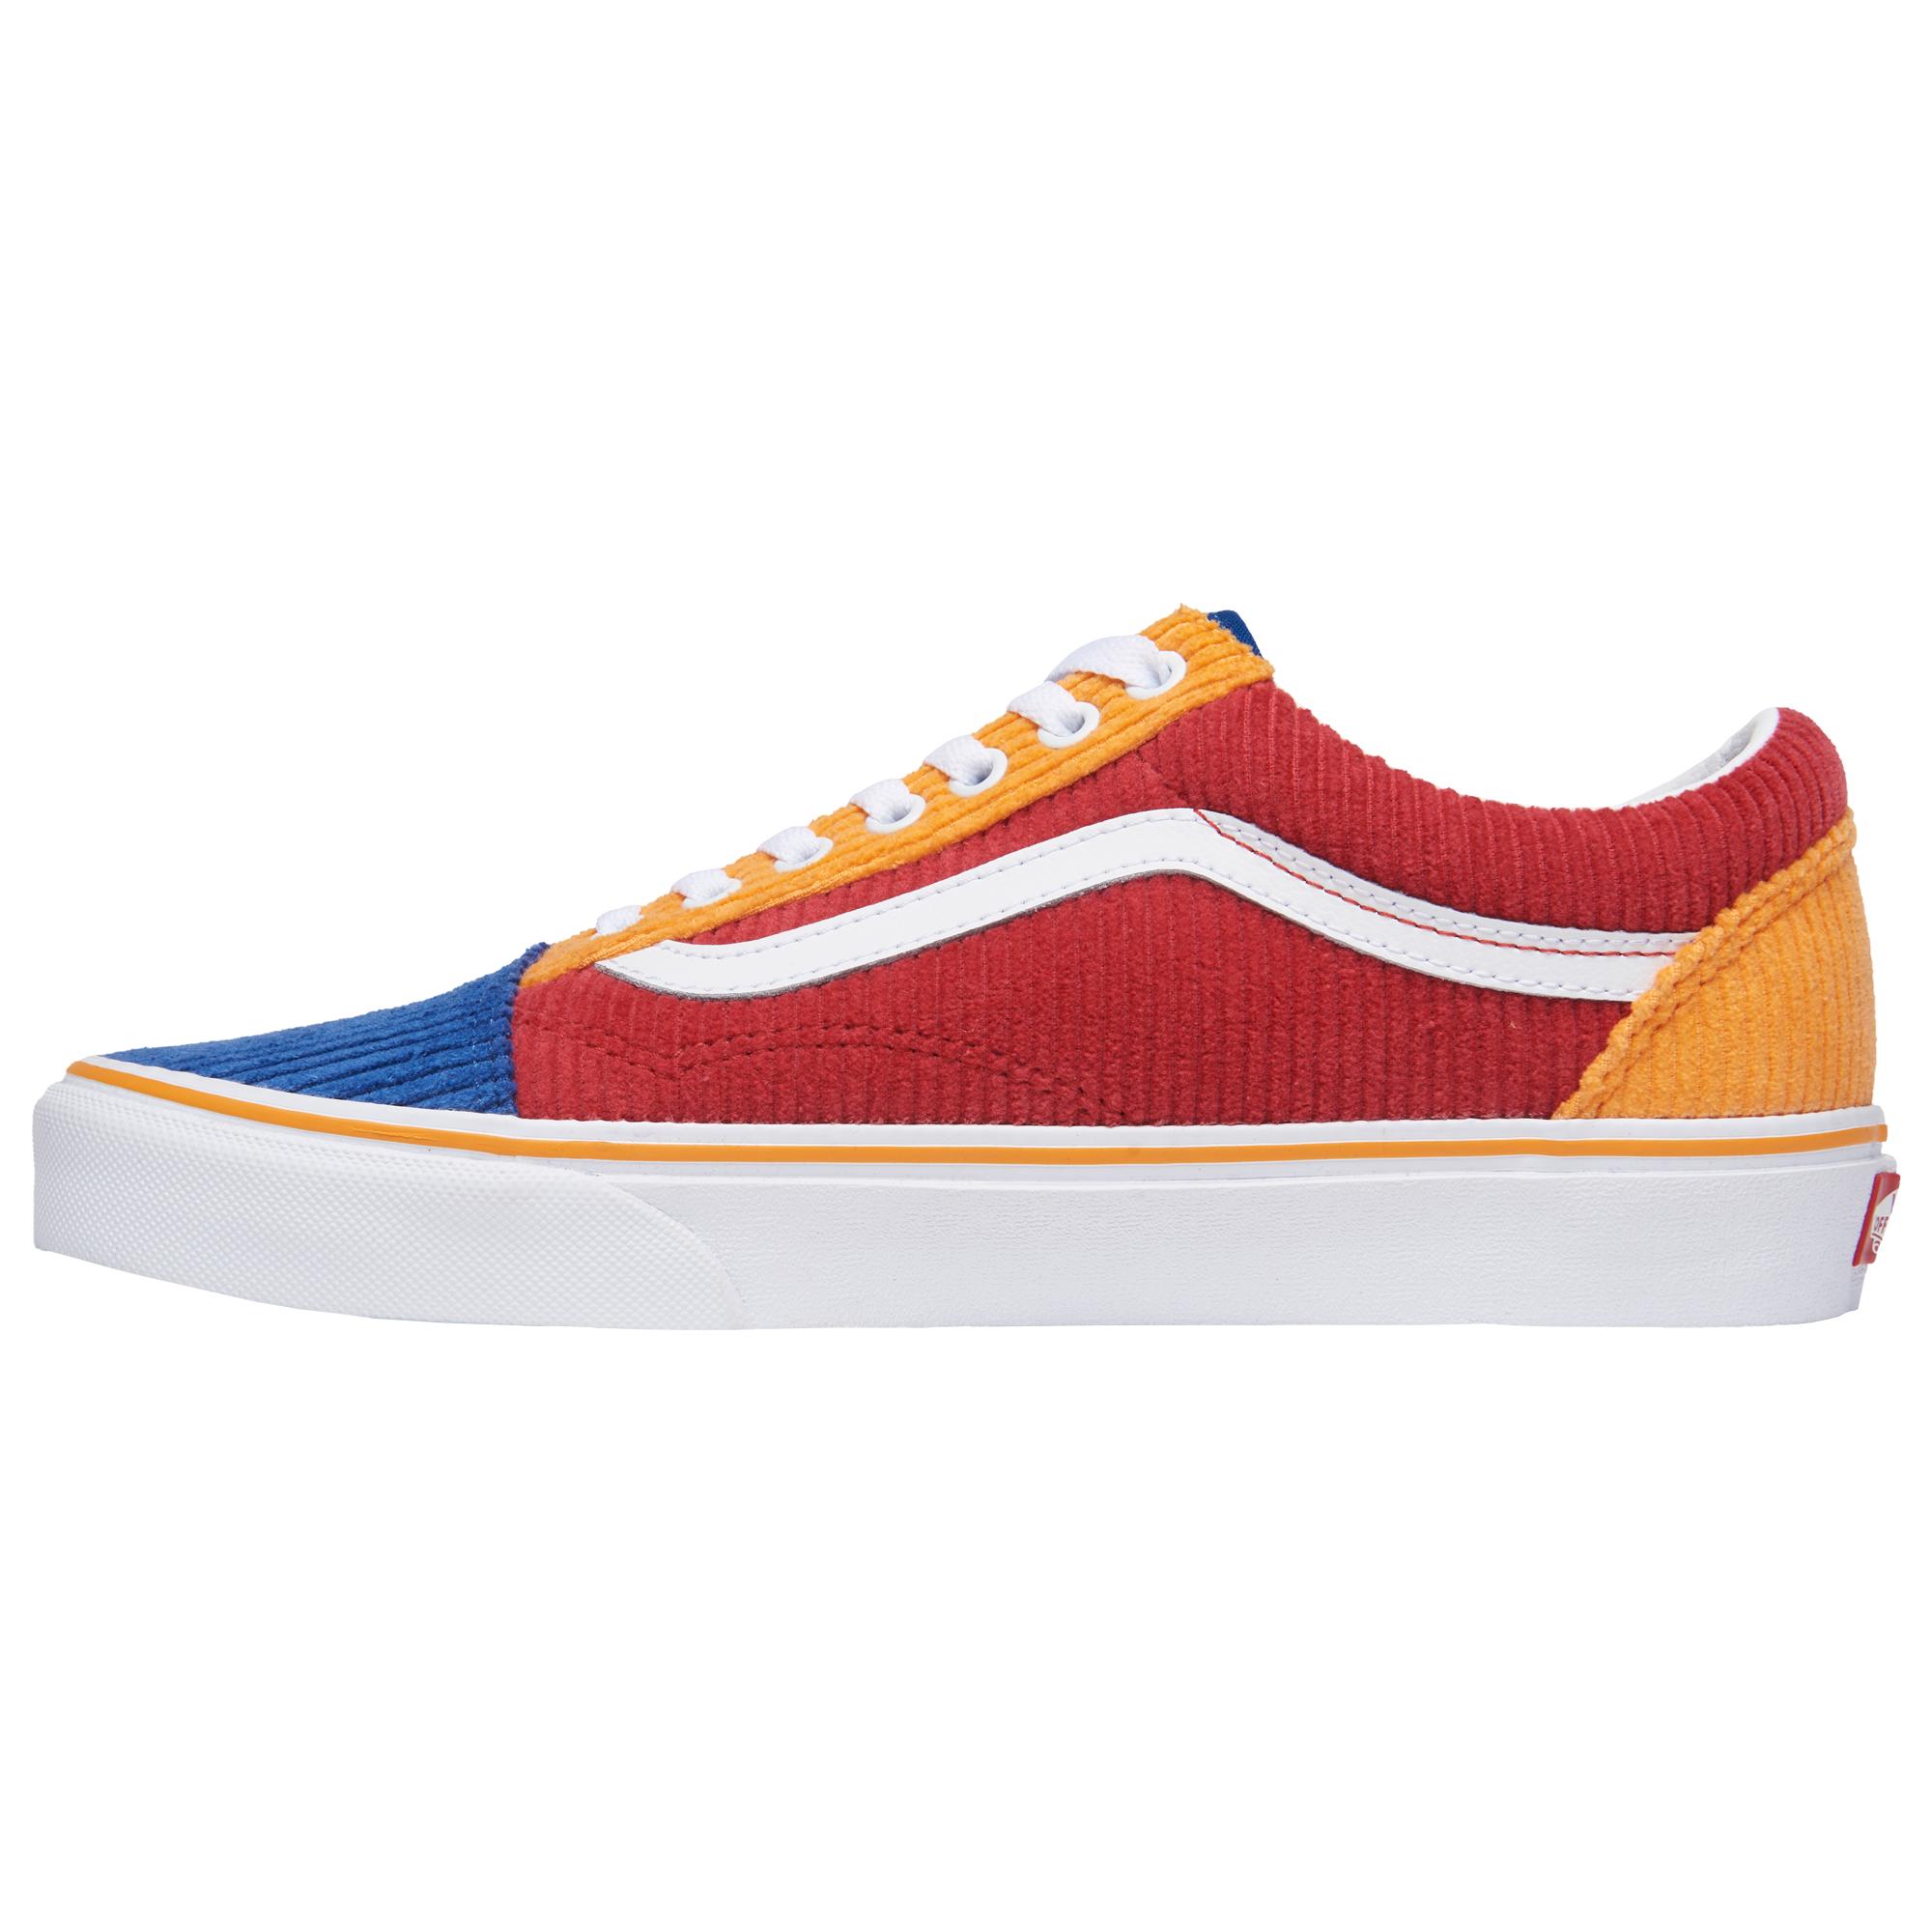 Red And Blue Vans Shop, SAVE 57%.